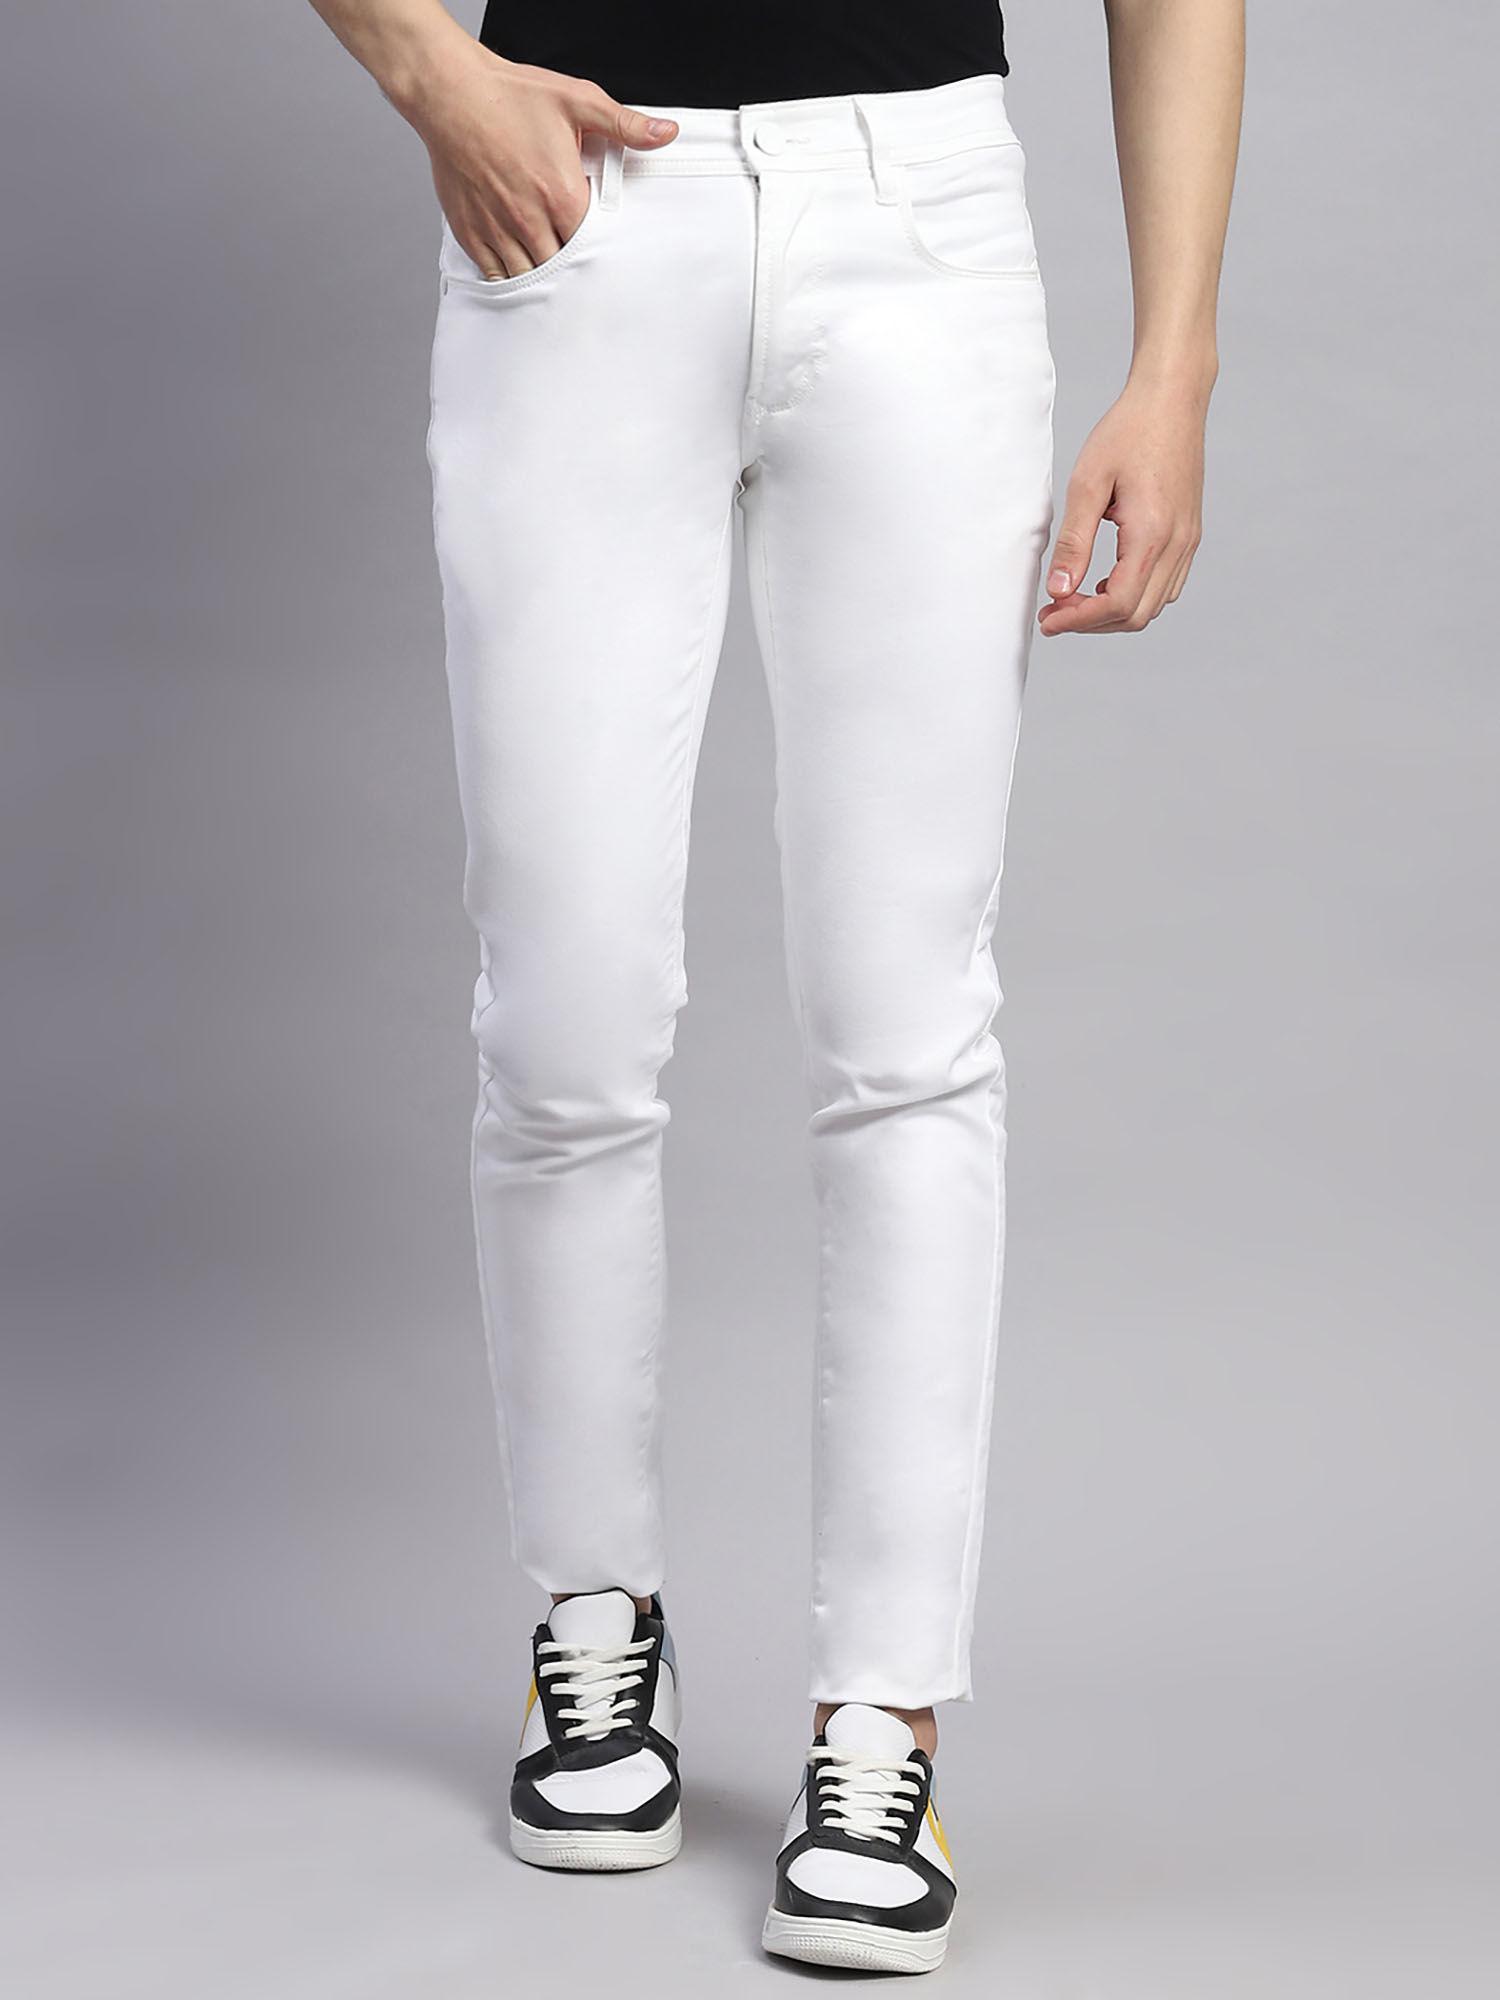 mens-white-light-wash-cotton-blend-skinny-fit-casual-jeans